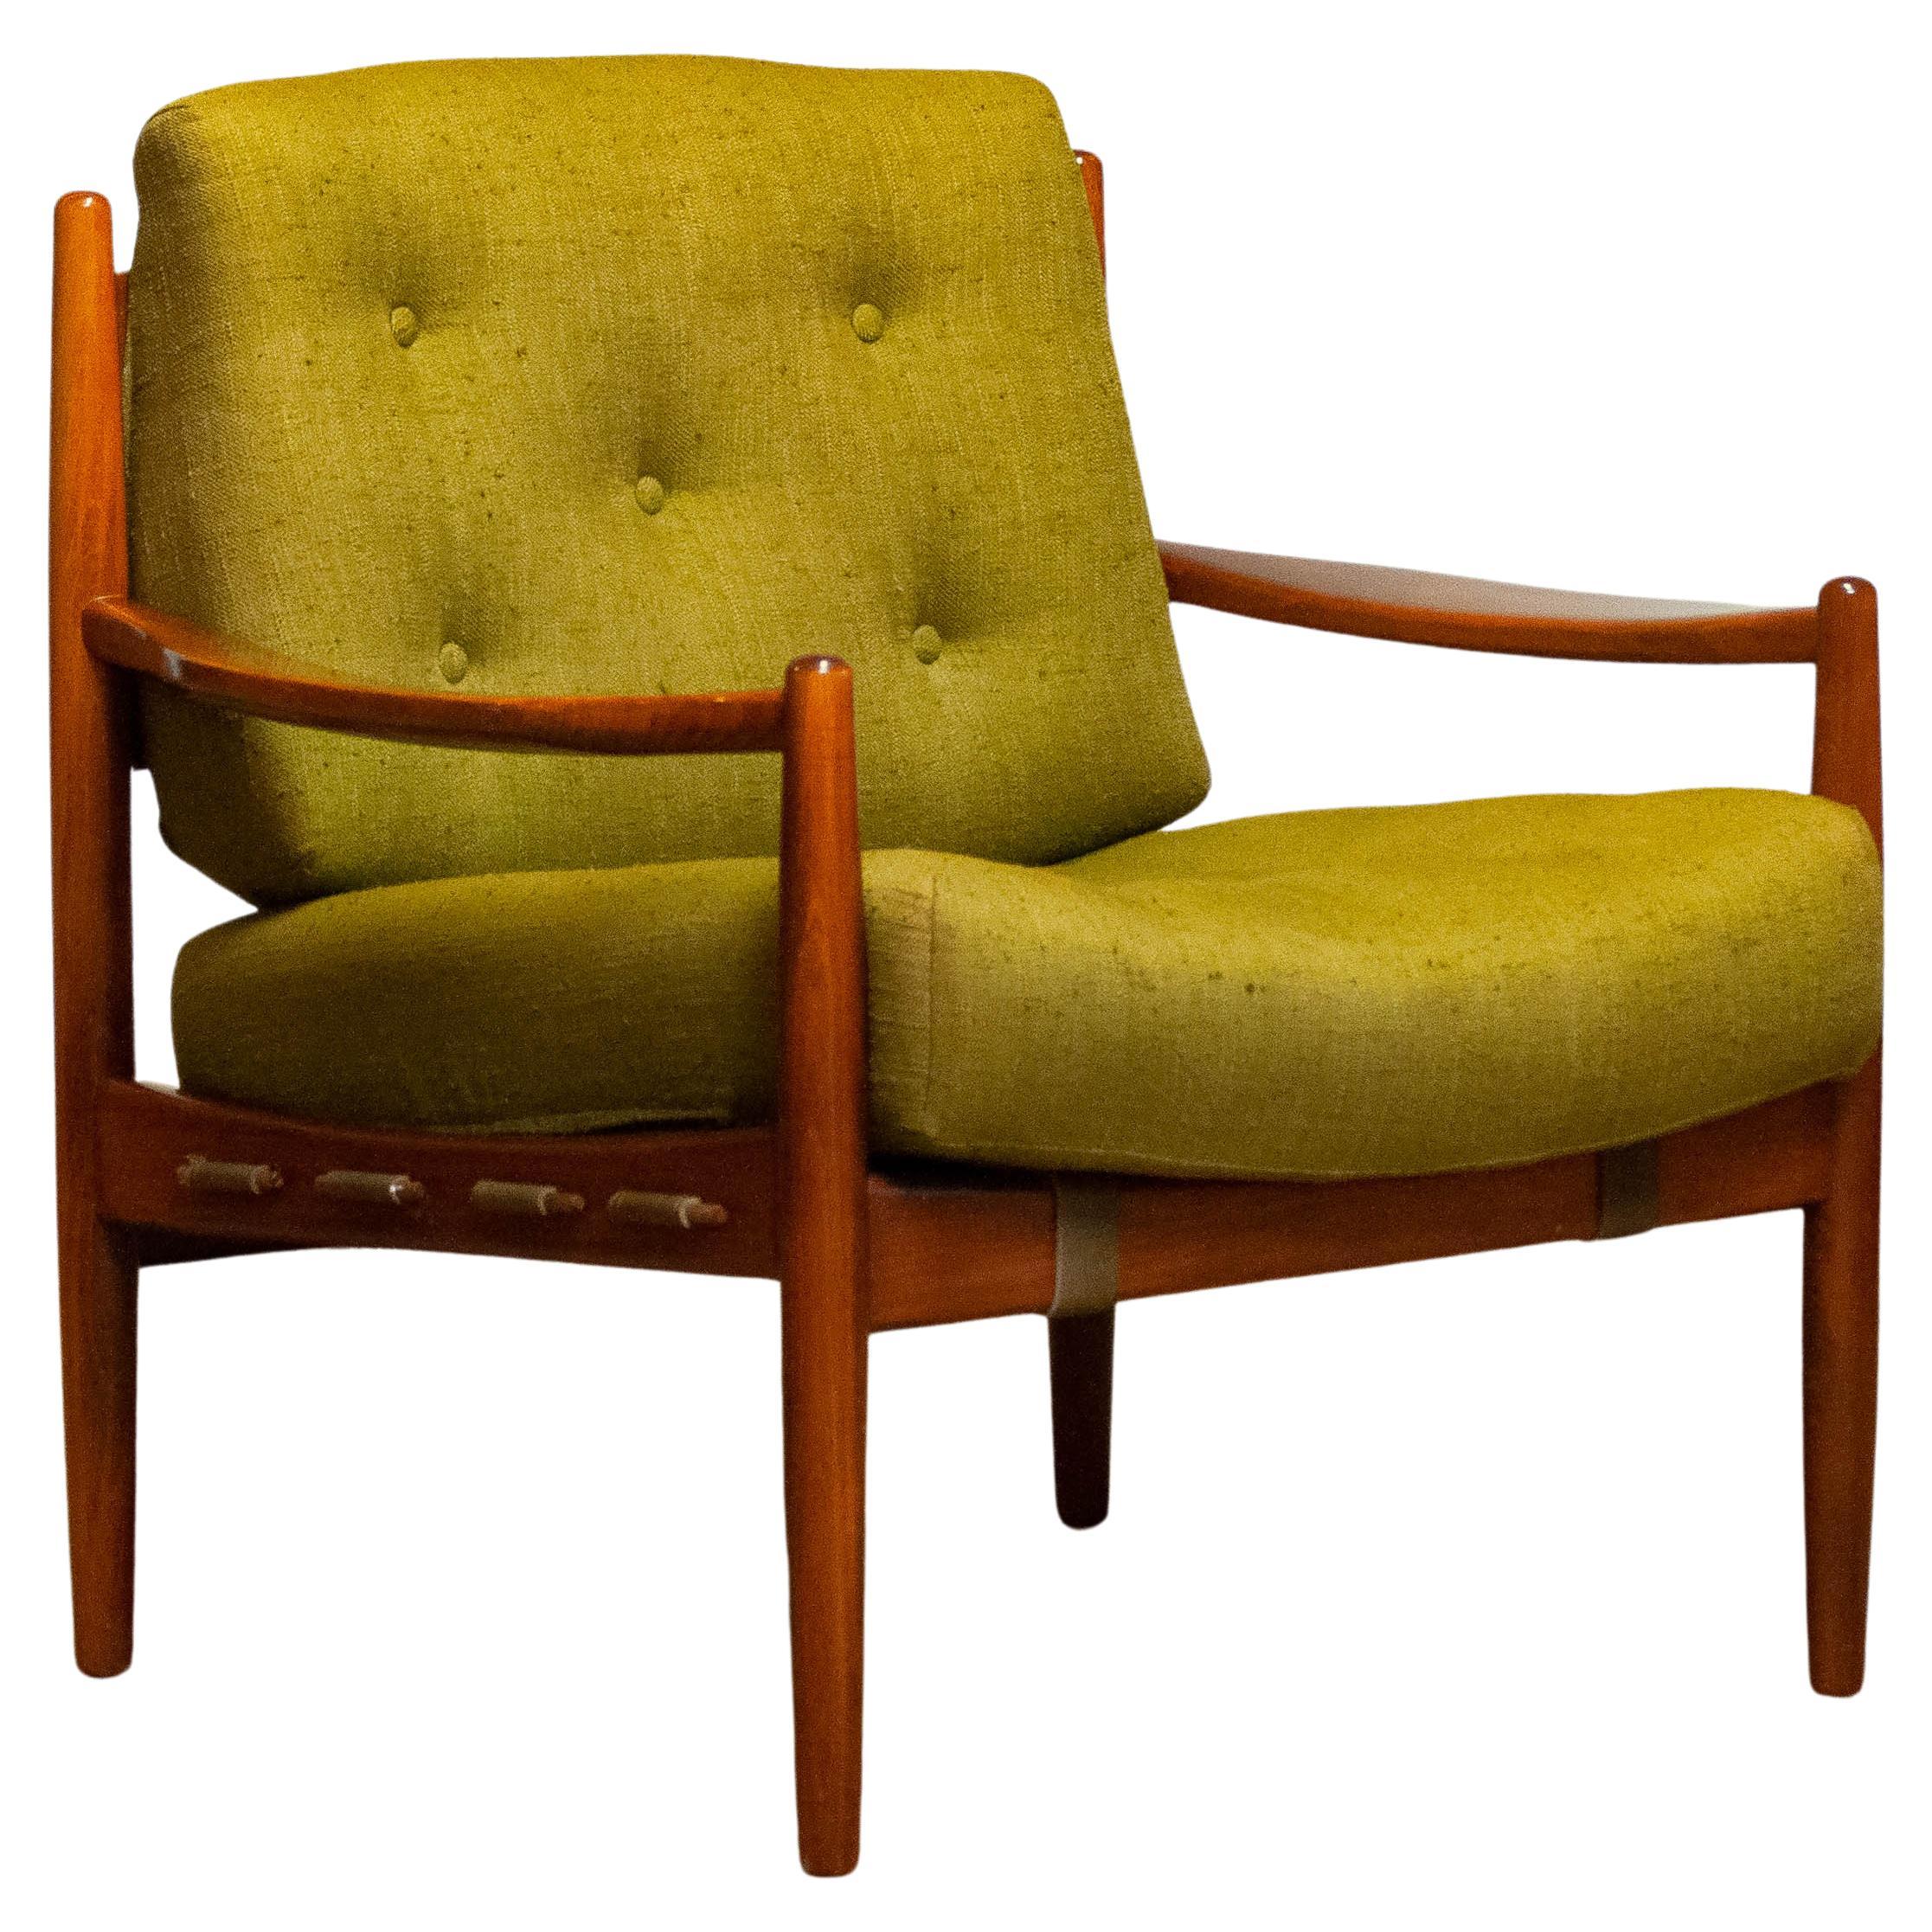 60's Green Linen Lounge Chair By Ingemar Thillmark For OPE Sweden 'Model Läckö' For Sale